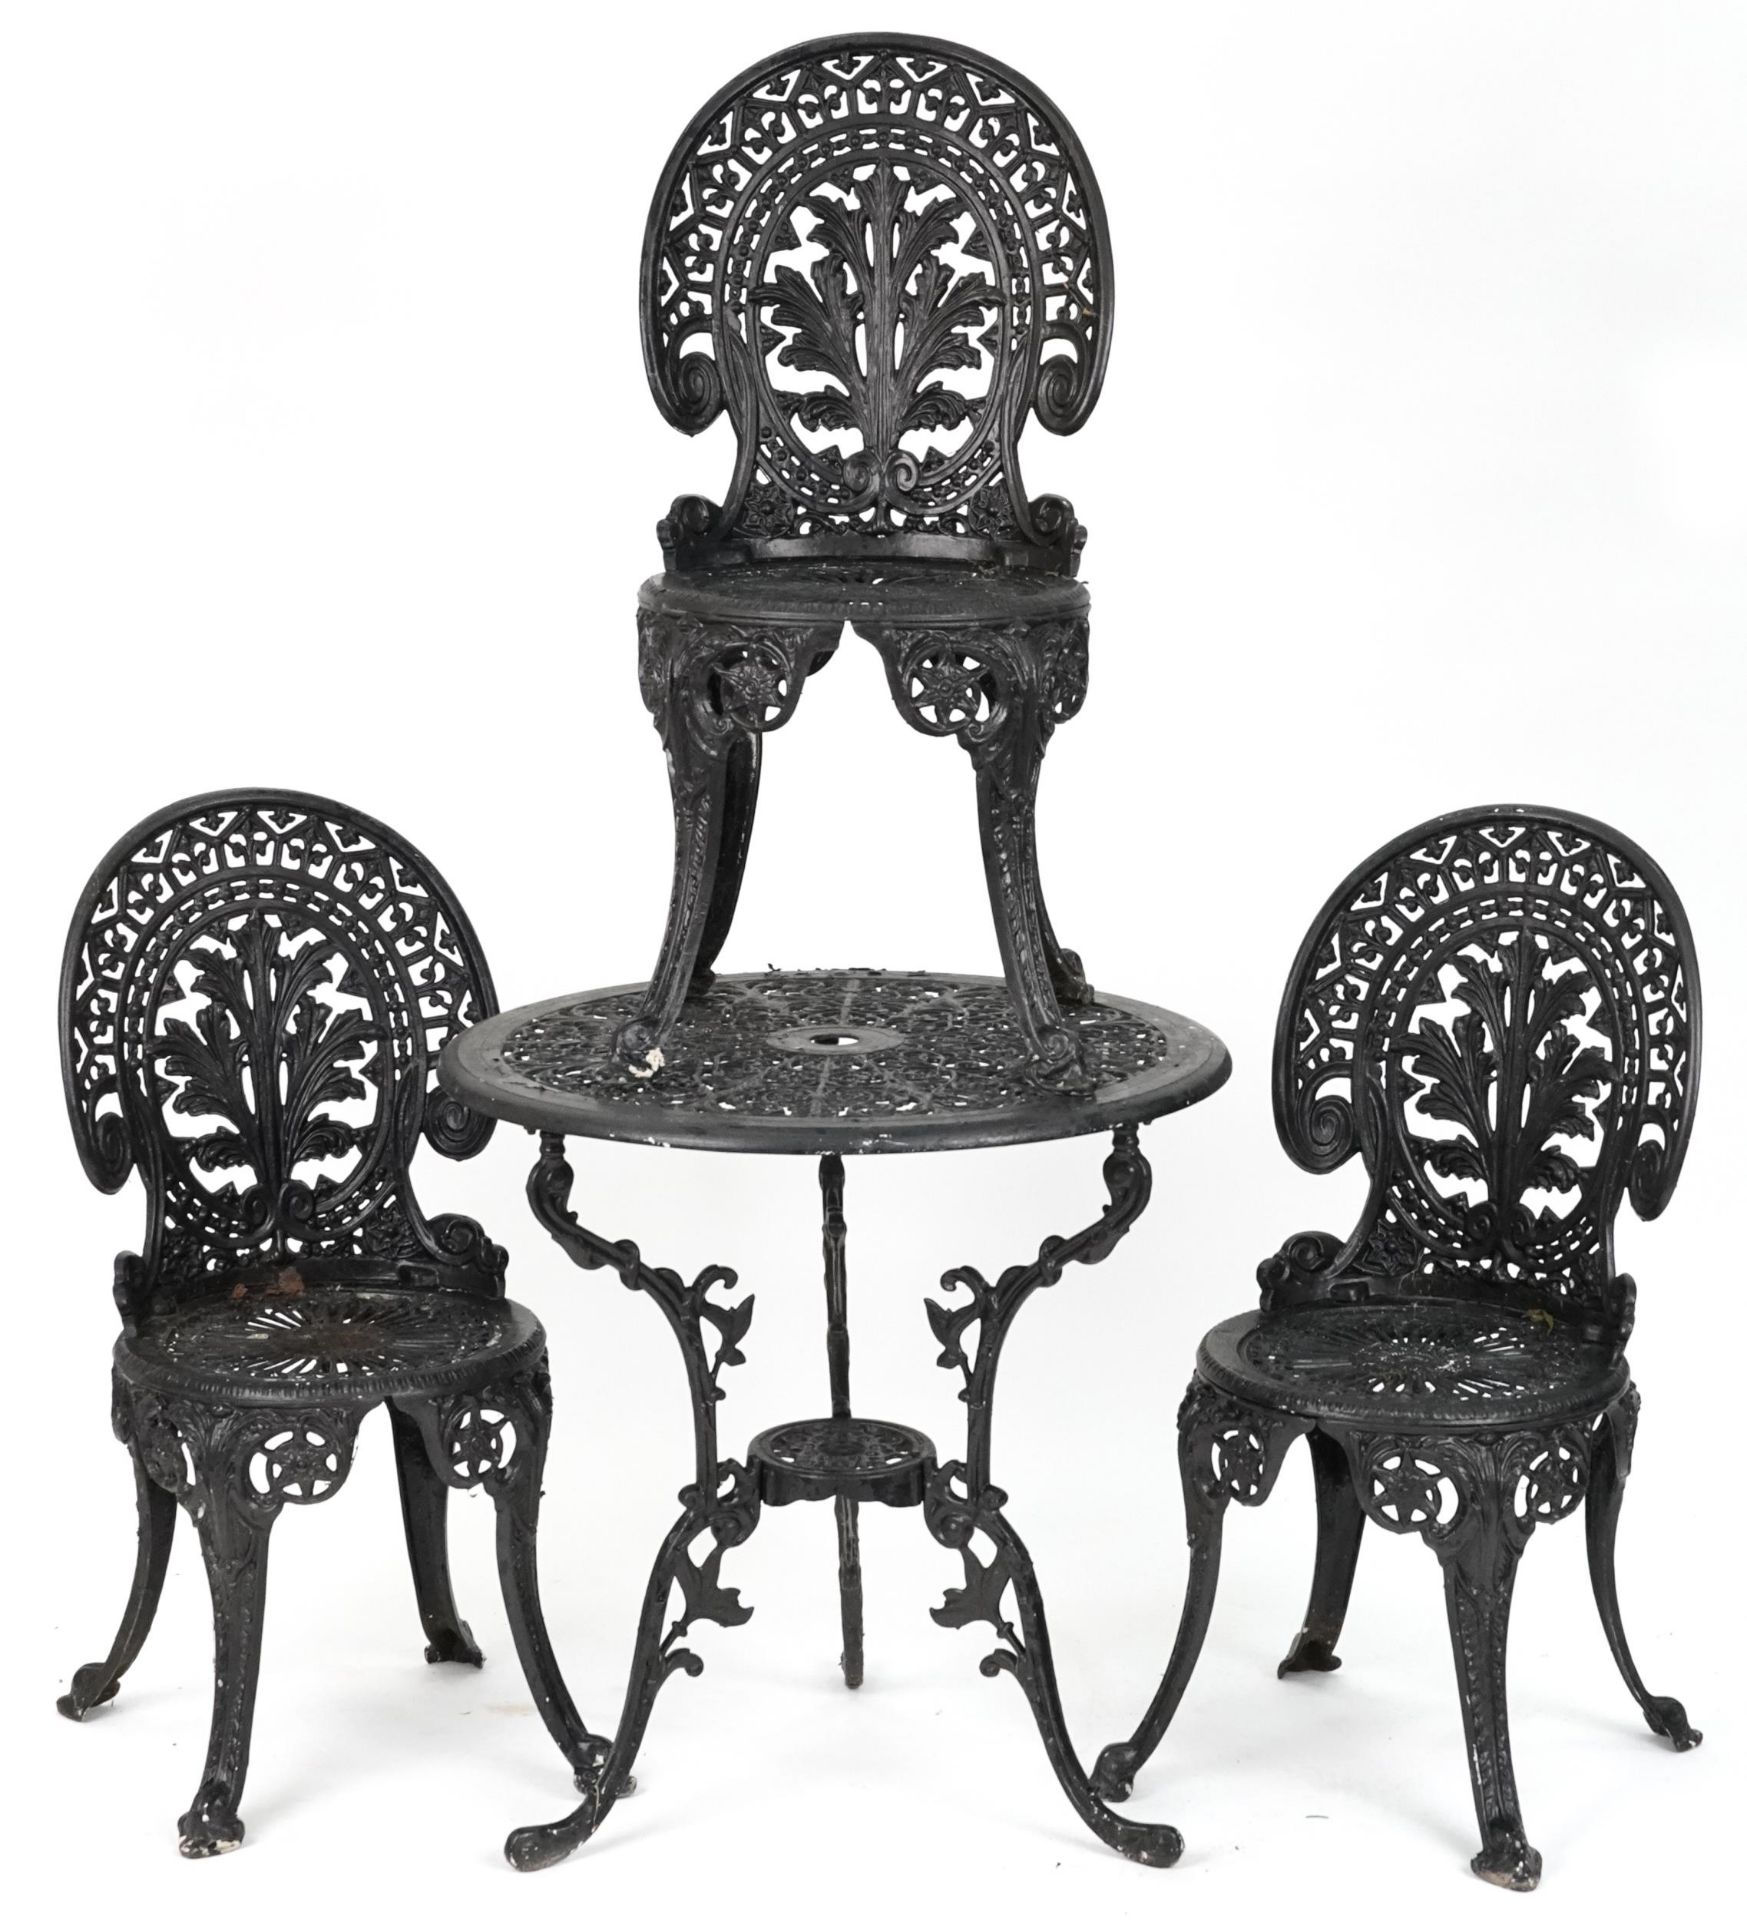 Black painted cast metal circular garden table with three chairs, 70.5cm high x 69cm in diameter :